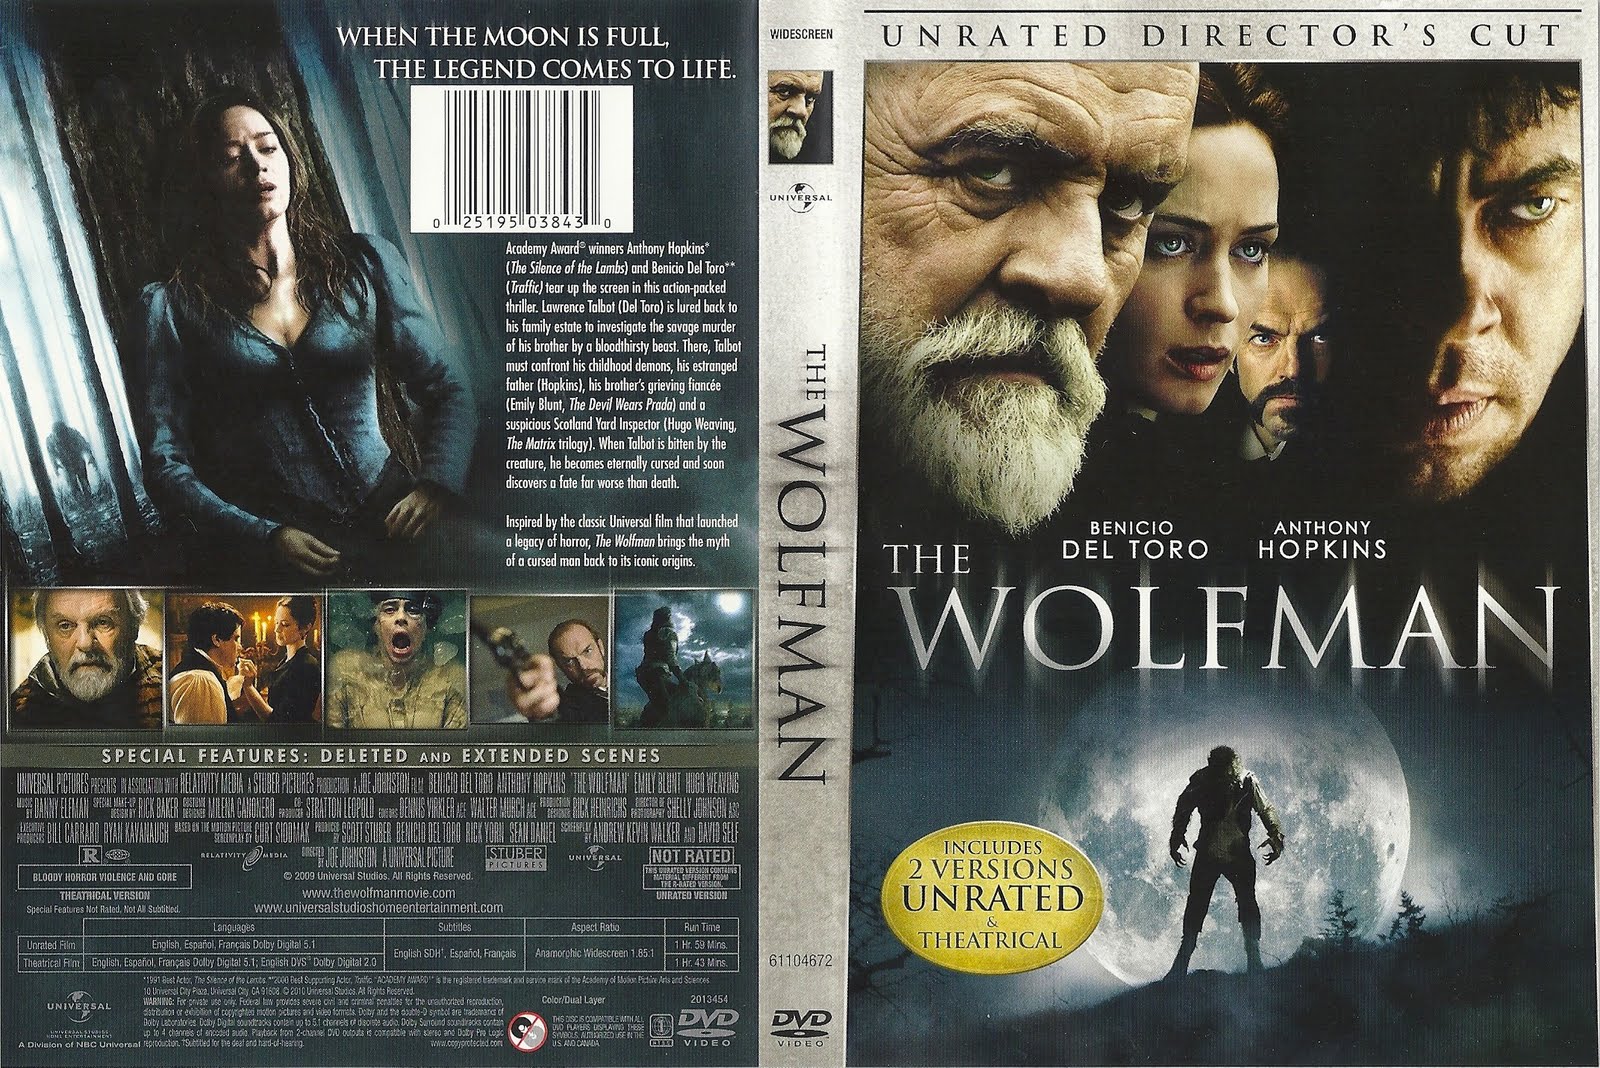 The Wolfman 2010 Quotes. QuotesGram